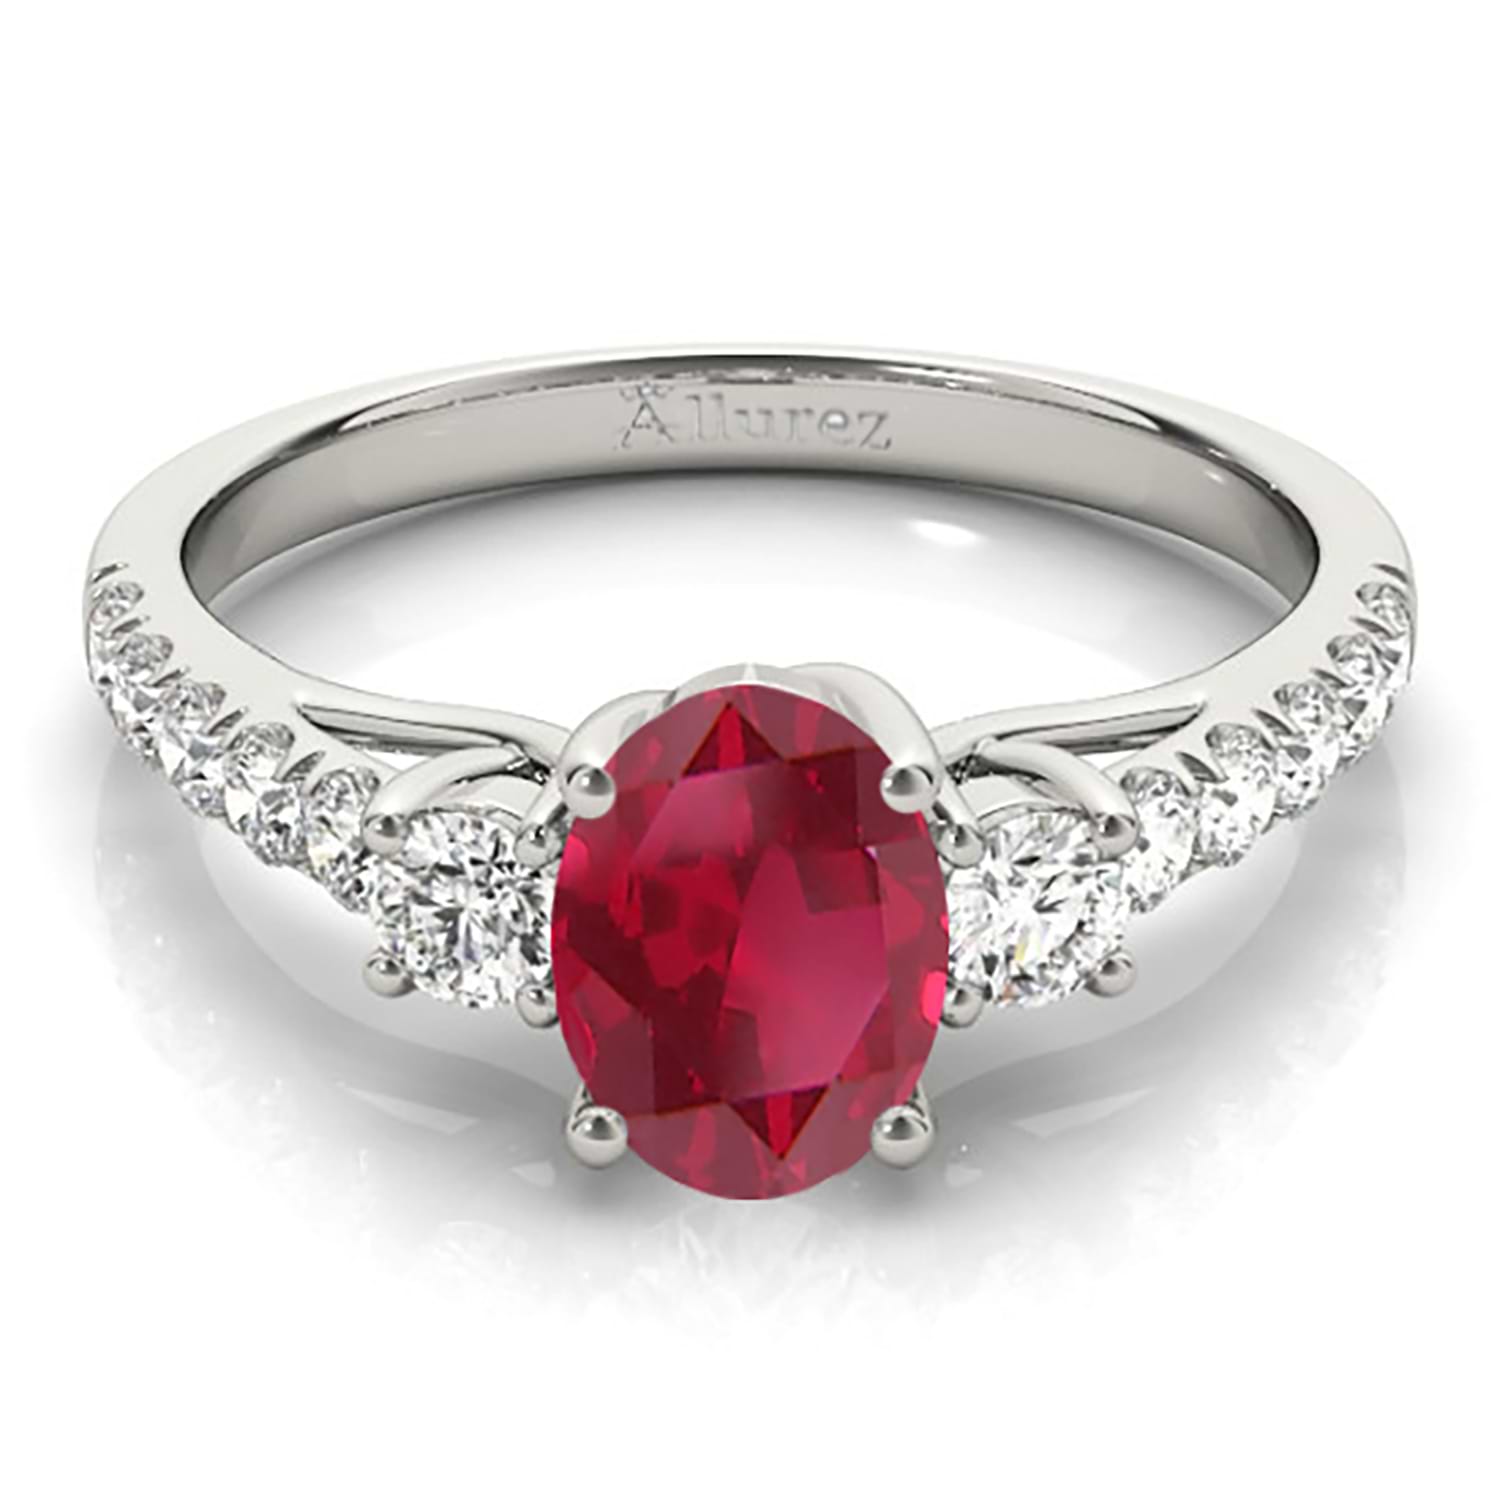 Oval Cut Ruby & Diamond Engagement Ring 18k White Gold (1.40ct)